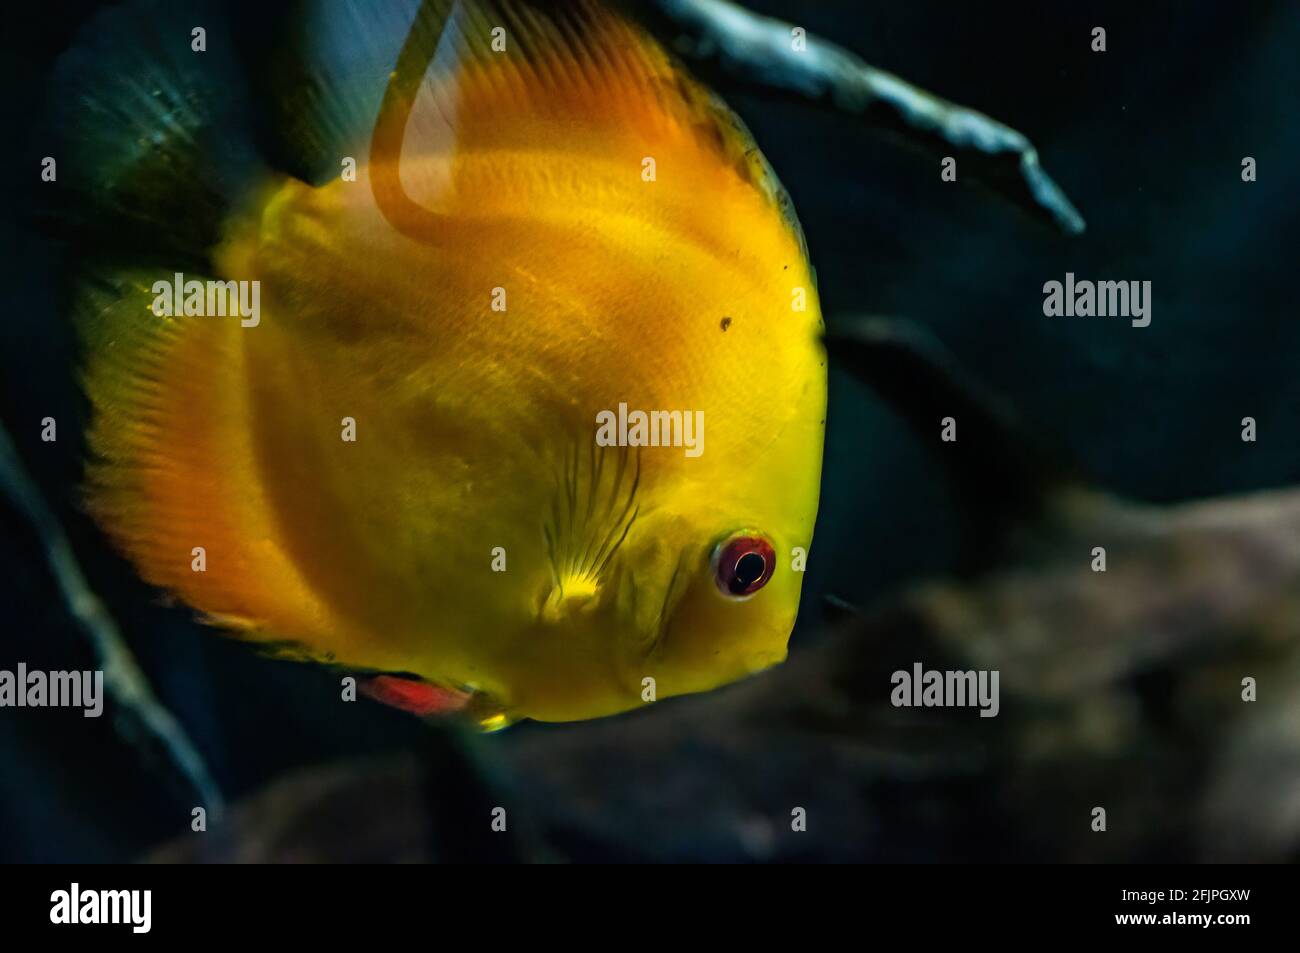 An yellow Discus fish (Symphysodon - a genus of cichlids native to the Amazon river basin) swimming in his enclosure at Sao Paulo aquarium. Stock Photo